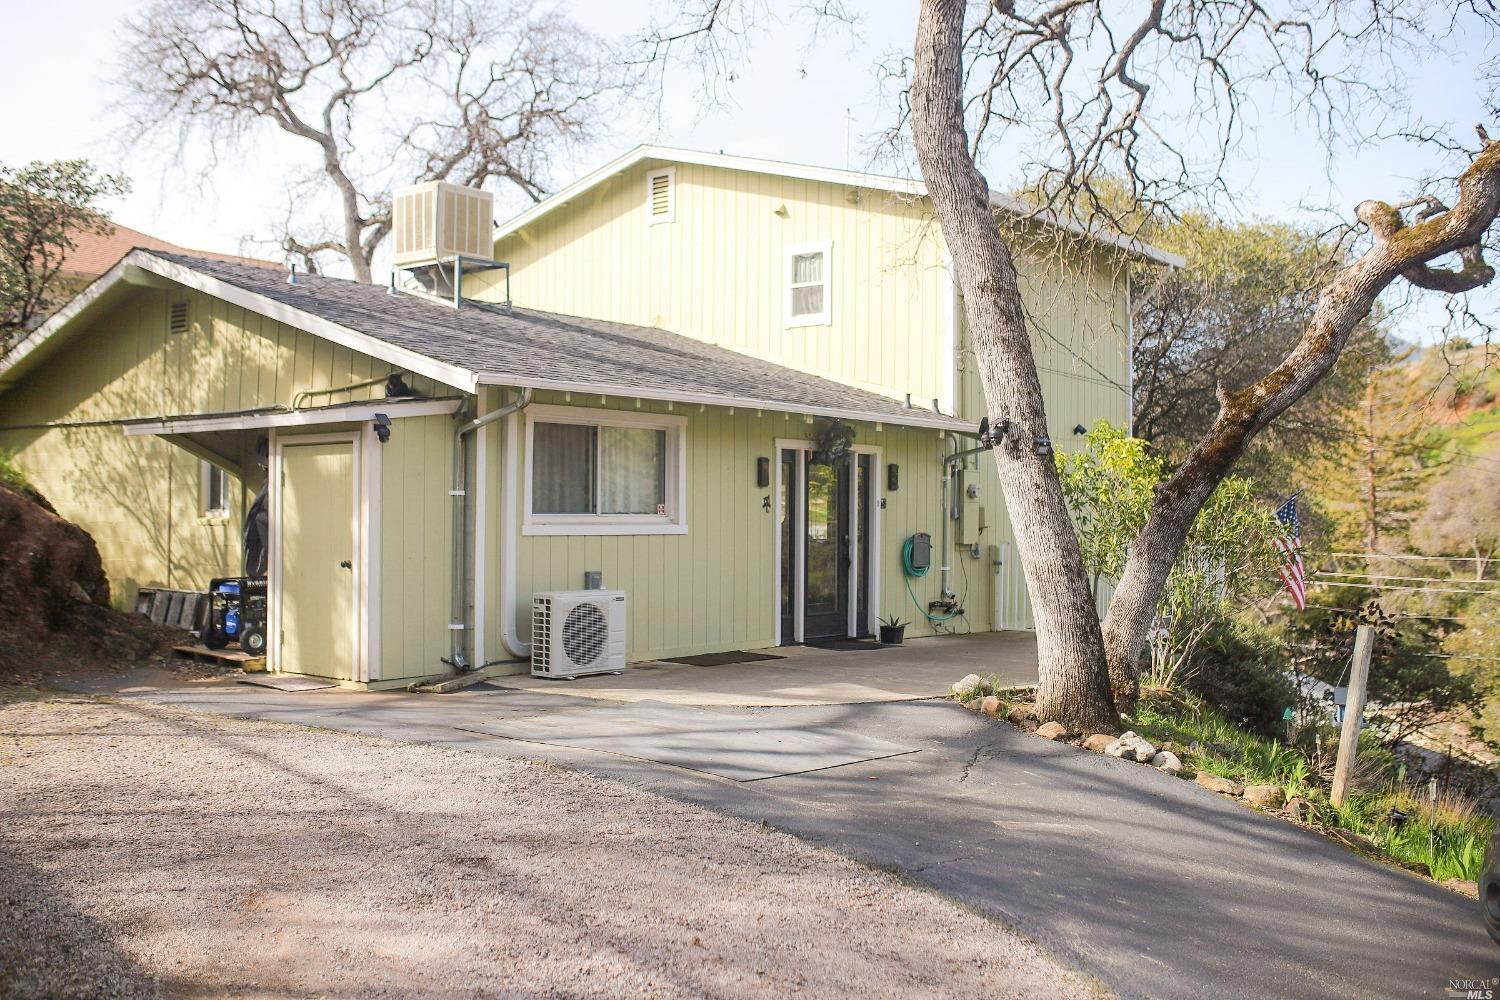 Photo of 3740 Kern Ave in Clearlake, CA